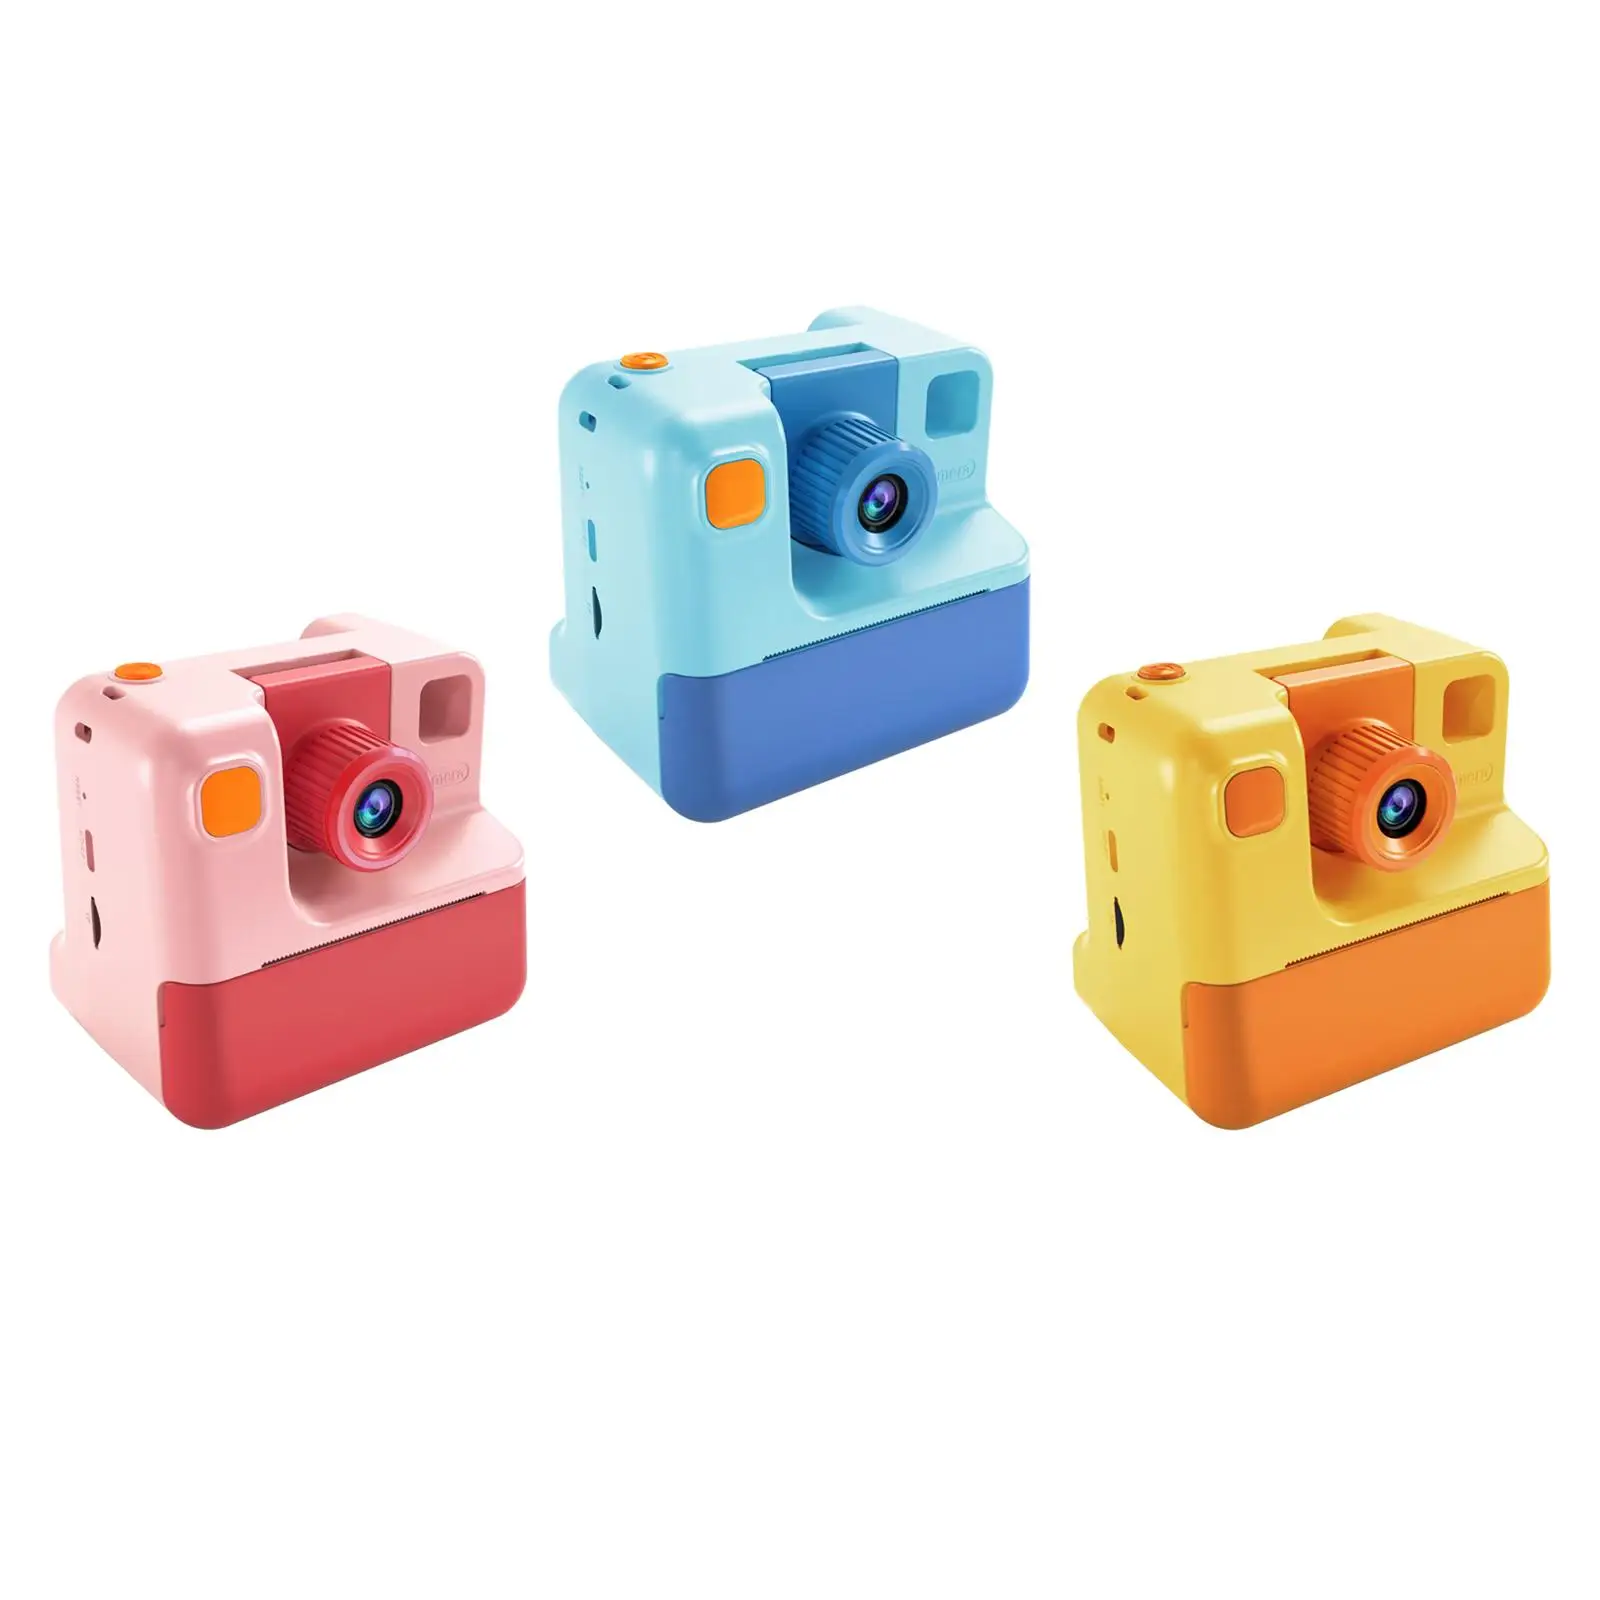 Kids Instant Print Camera Children Toy Novelty Small Educational Toys Portable for Children Ages 3 4 5 6 Year Old Boys and Girls